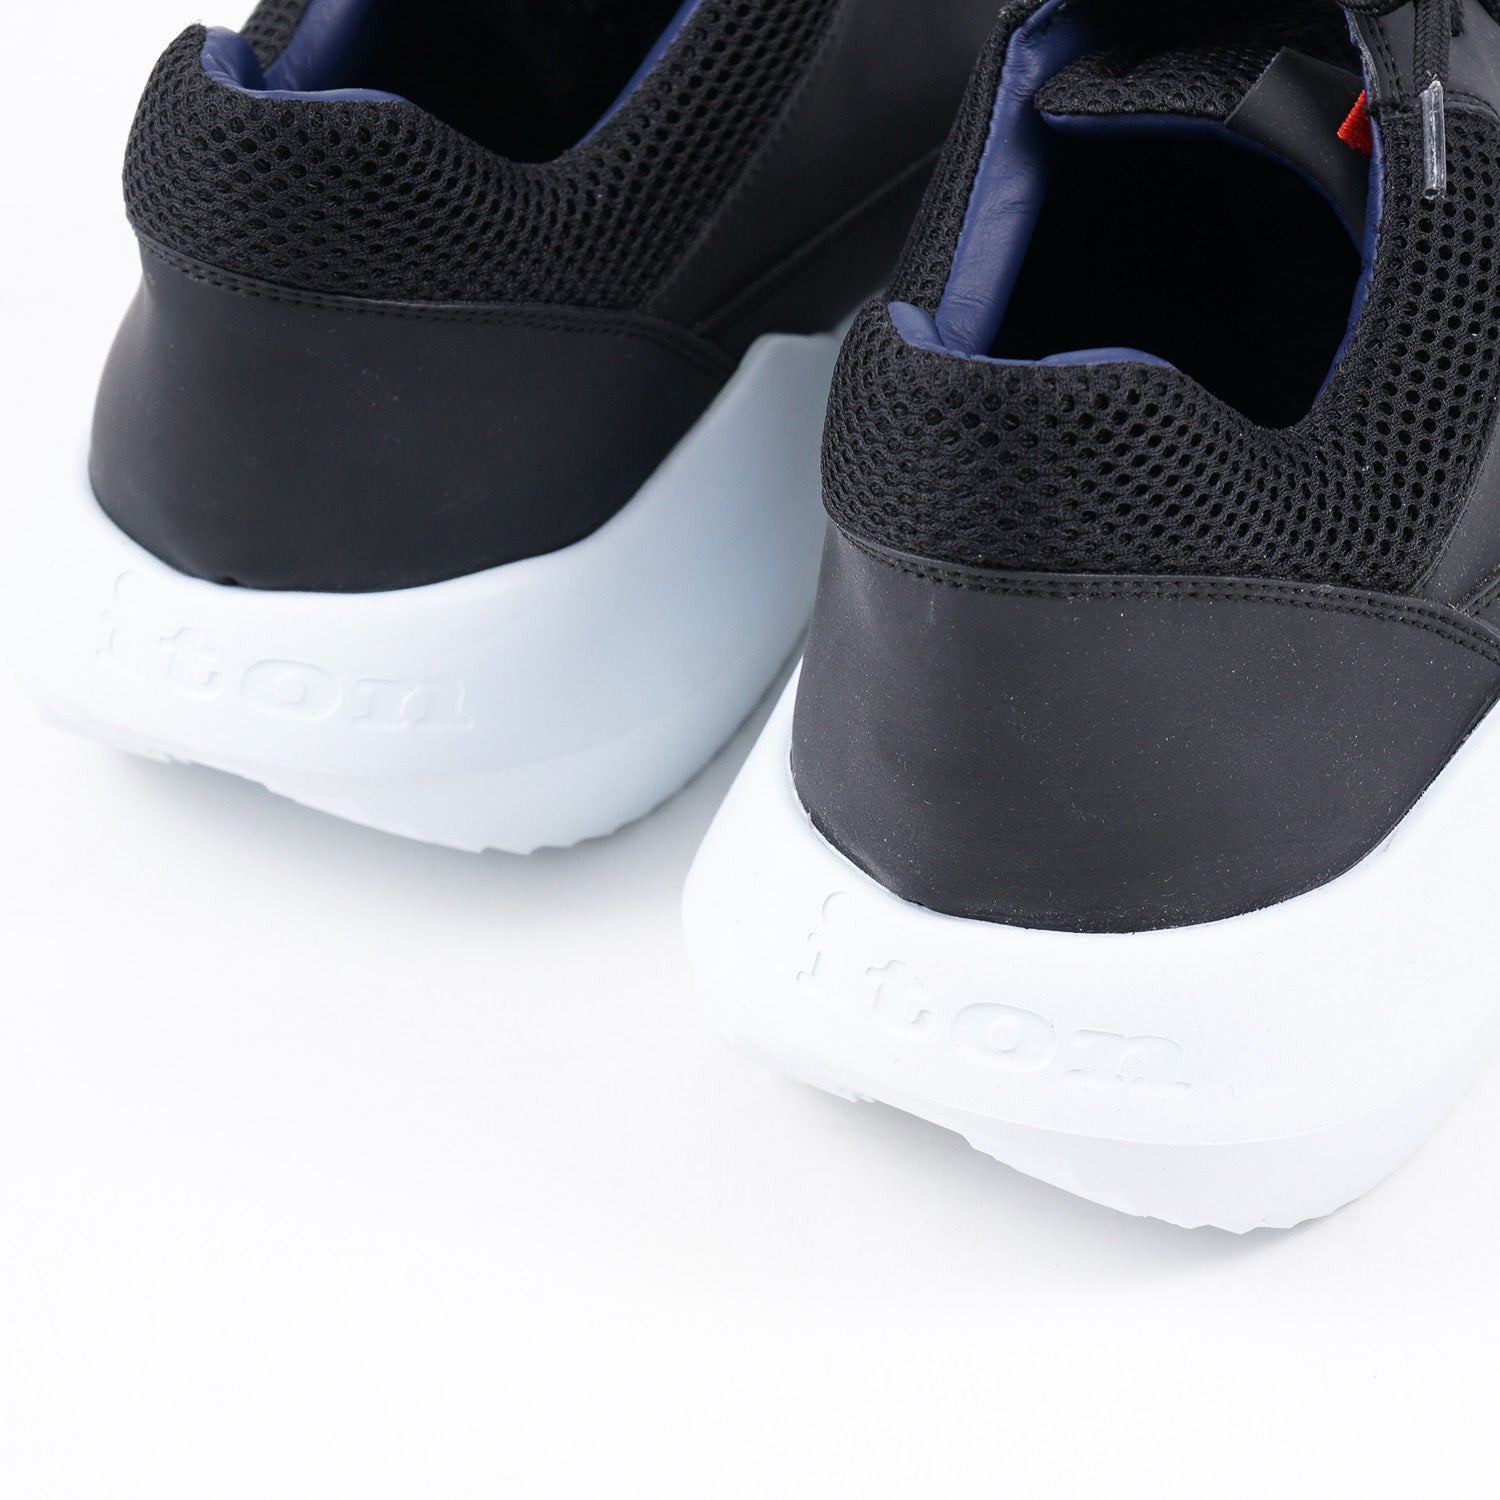 Kiton KNT Leather and Textile Sneakers - Top Shelf Apparel